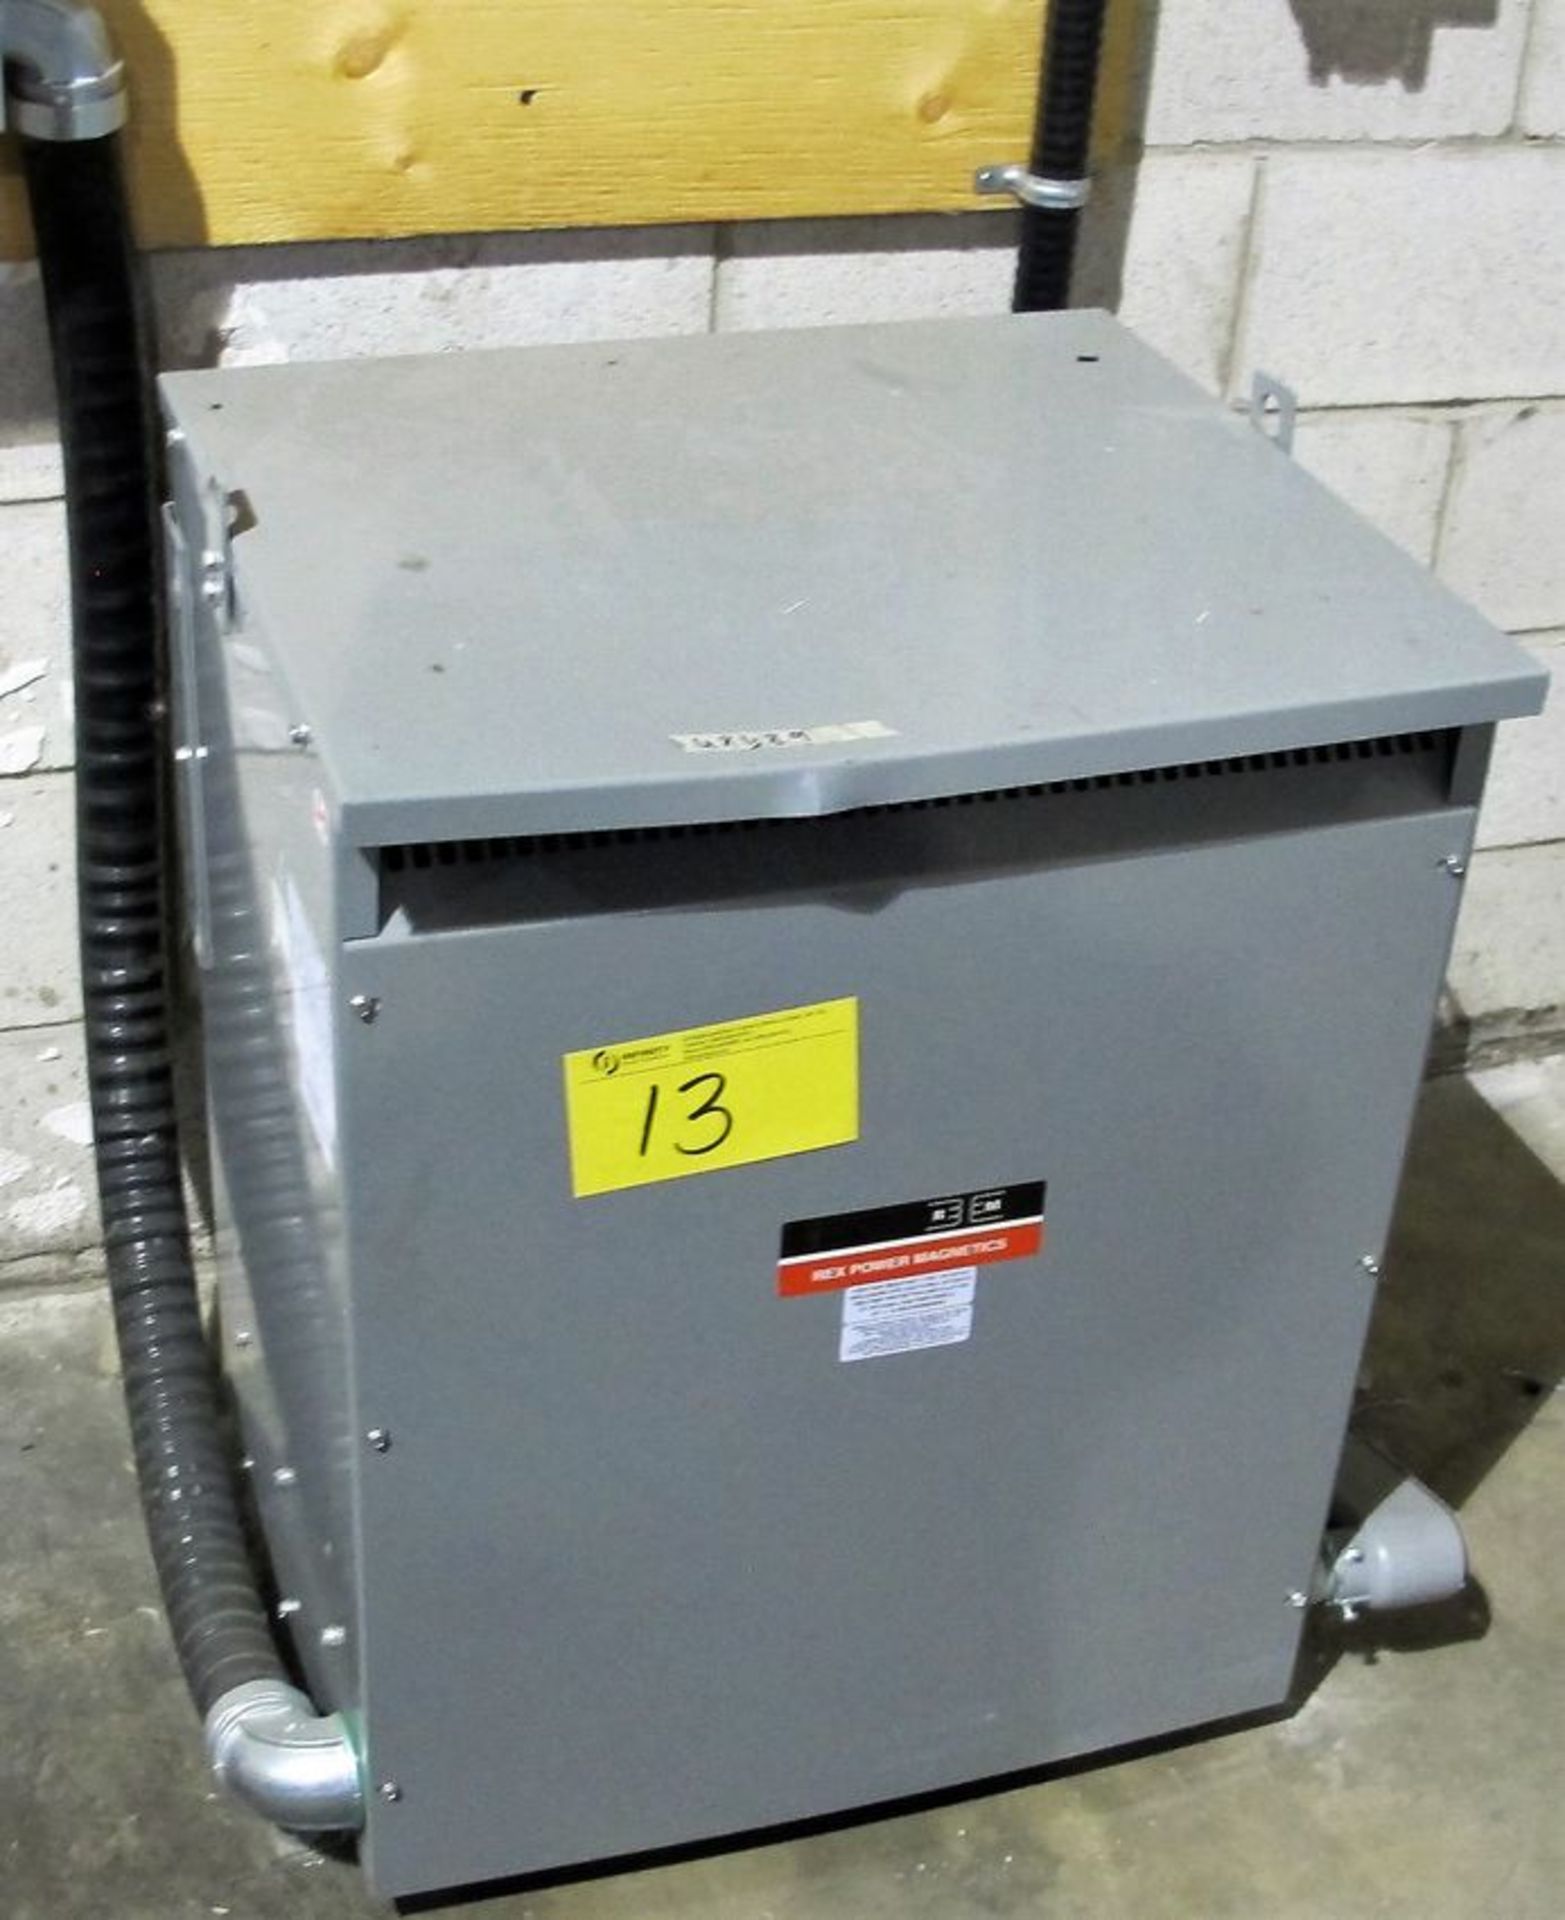 REX MANUFACTURING 150 KVA TRANSFORMER, 600/380V W/ EXM 380V SWITCH, SQUARE D HEAVY DUTY SWITCH, WIRE - Image 2 of 7